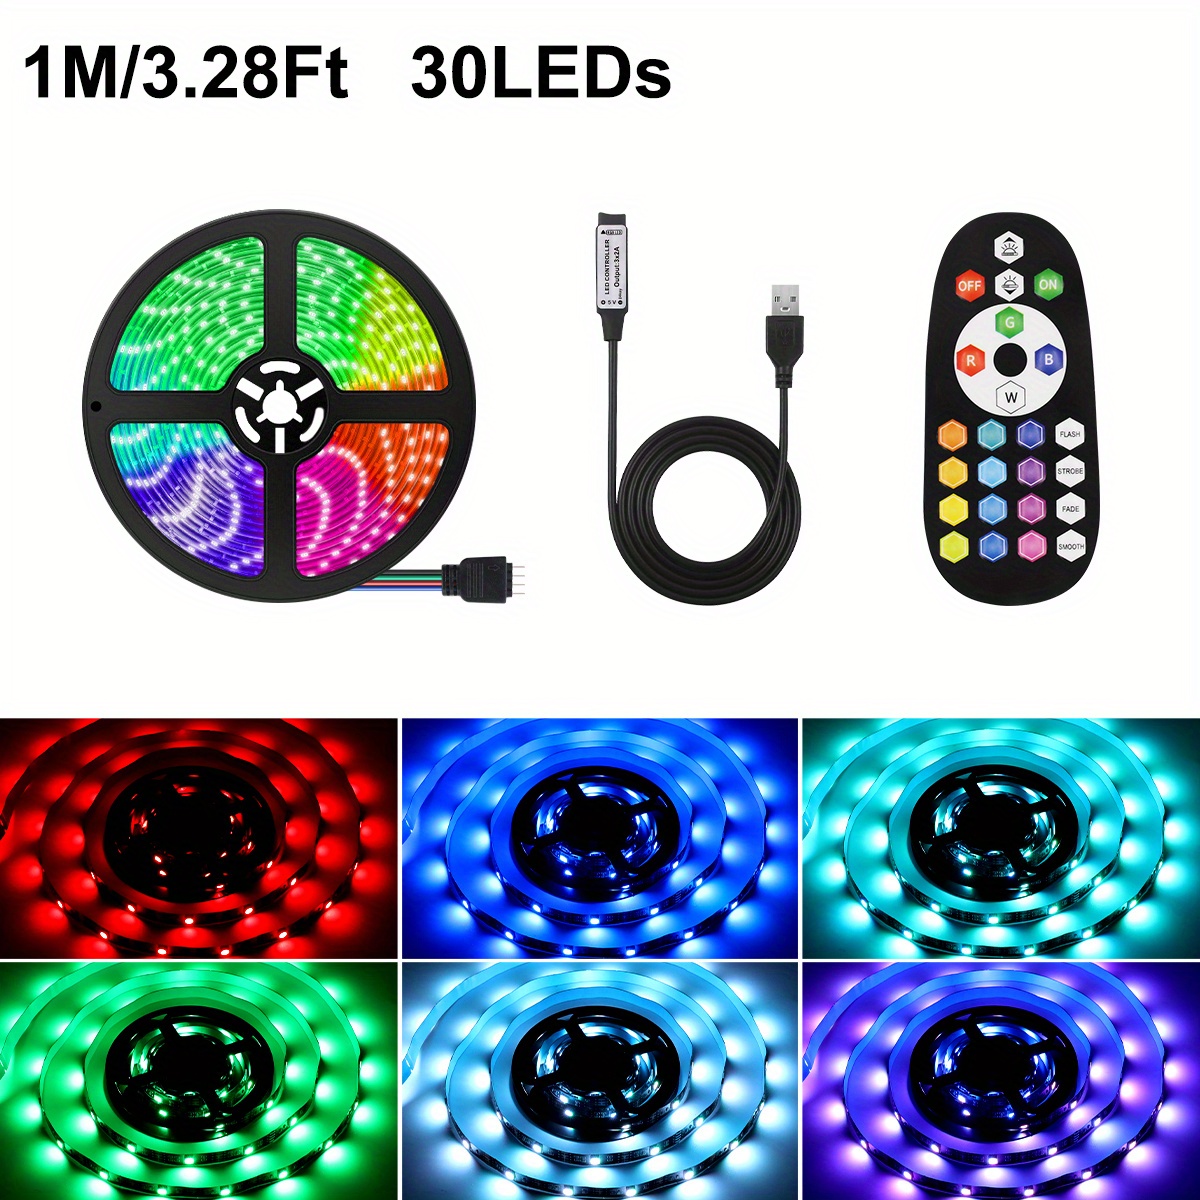 Flexible RGB Usb Rgb Led Strip With Remote Waterproof DIY 5050, DC 5V USB,  1M 5M Lengths For TV Background Lighting From Omeal1688, $3.74